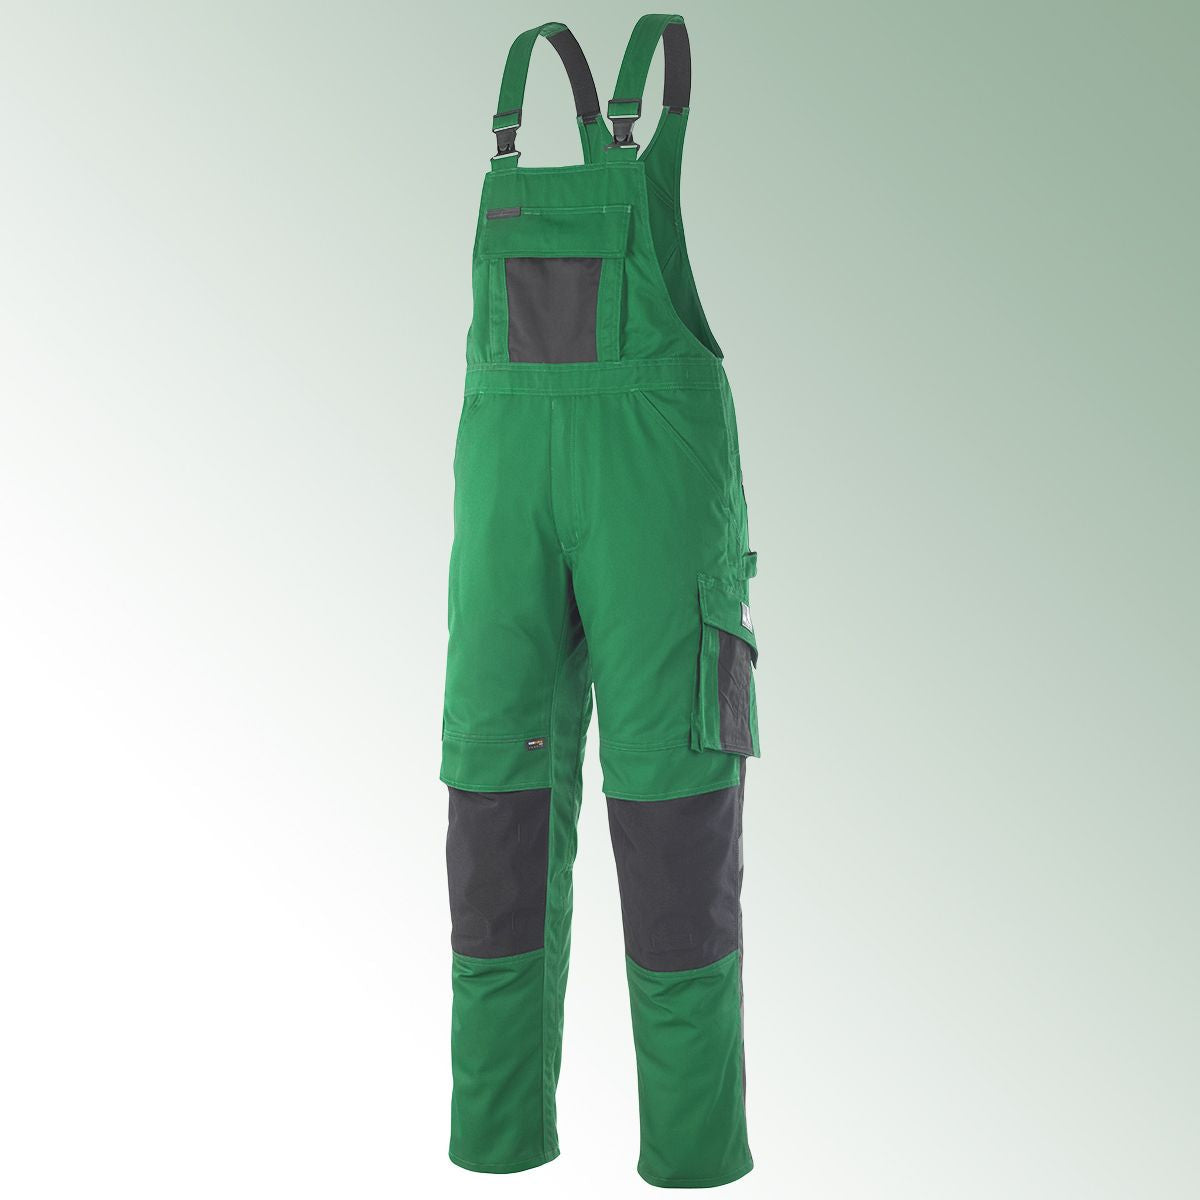 Dungarees Augsburg Size 58 Green / Black